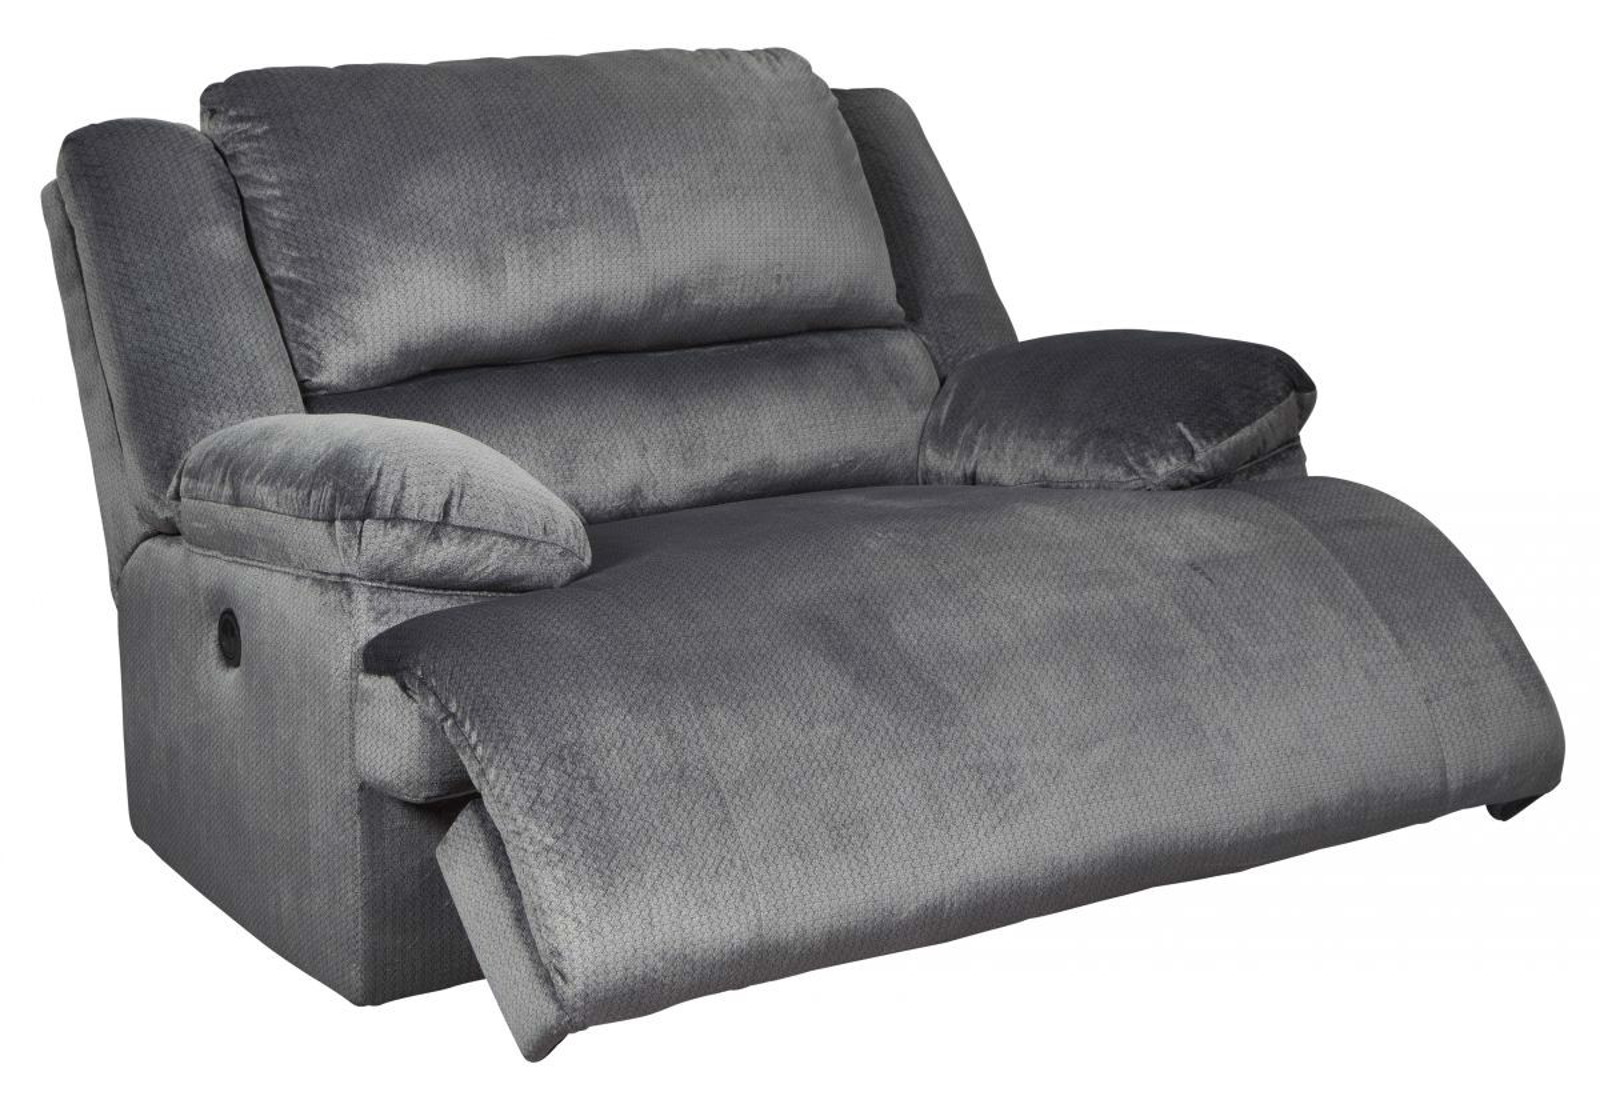 Picture of Clonmel Power Recliner